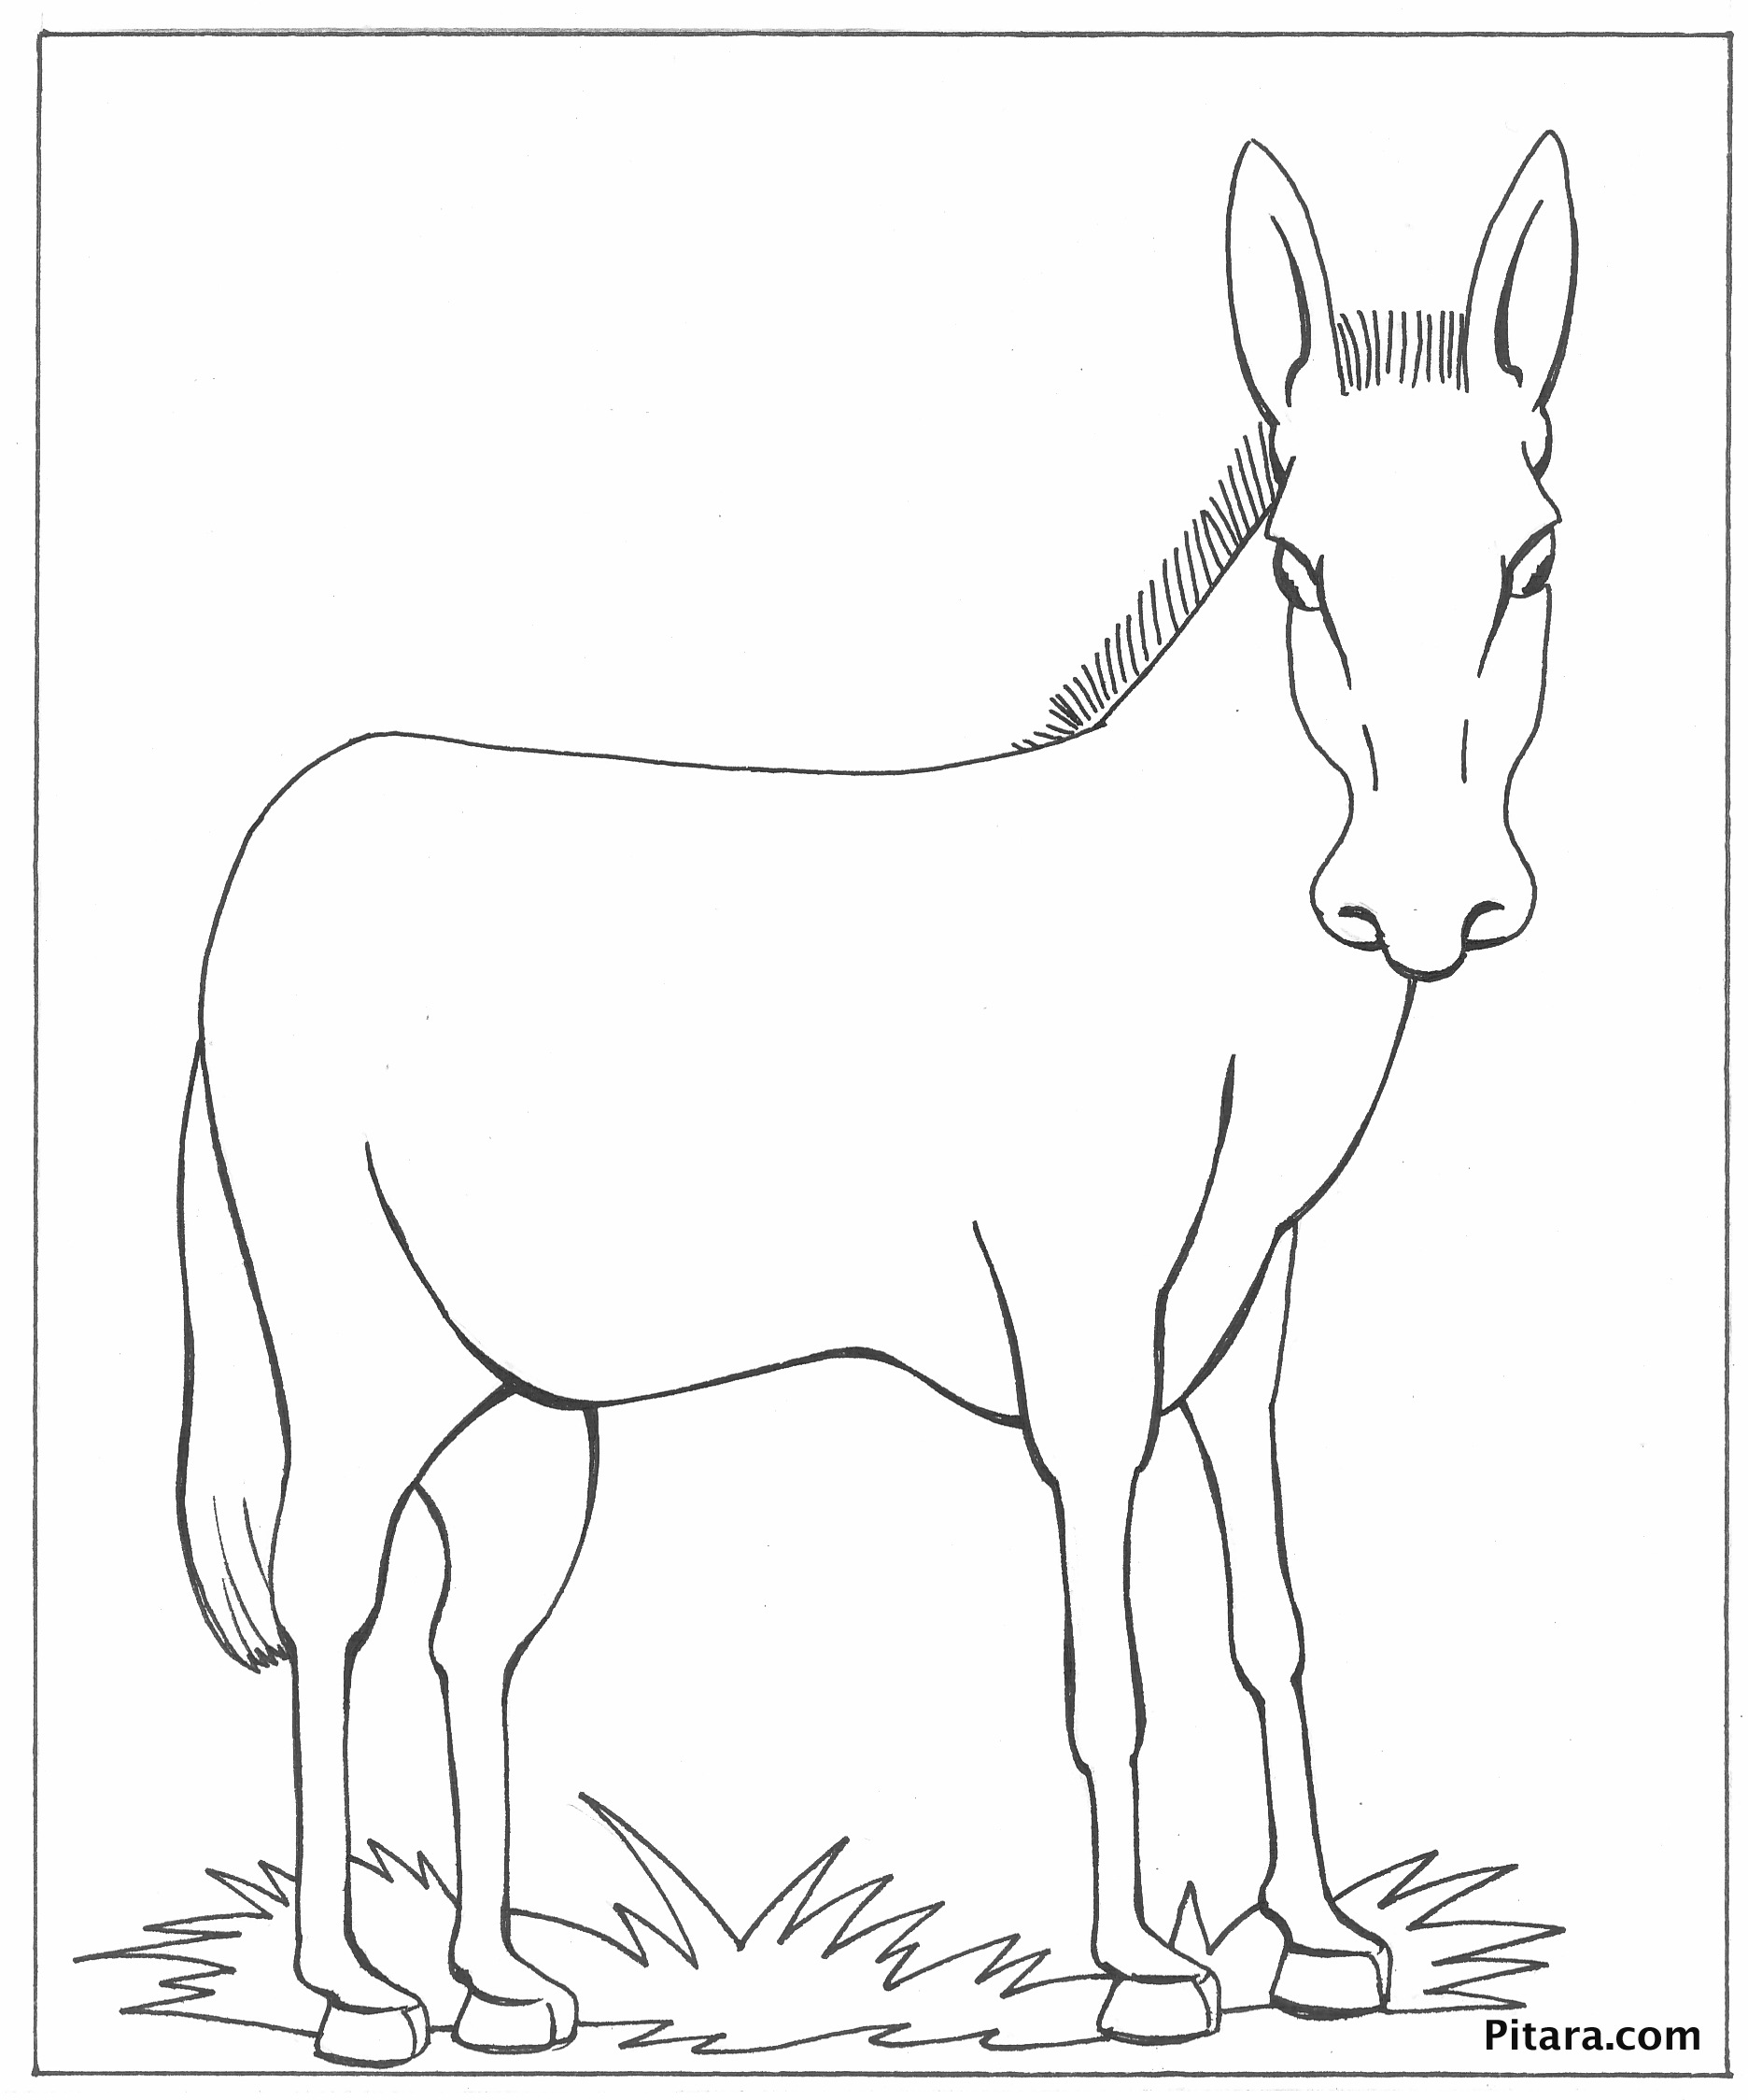 Donkey coloring pages to download and print for free